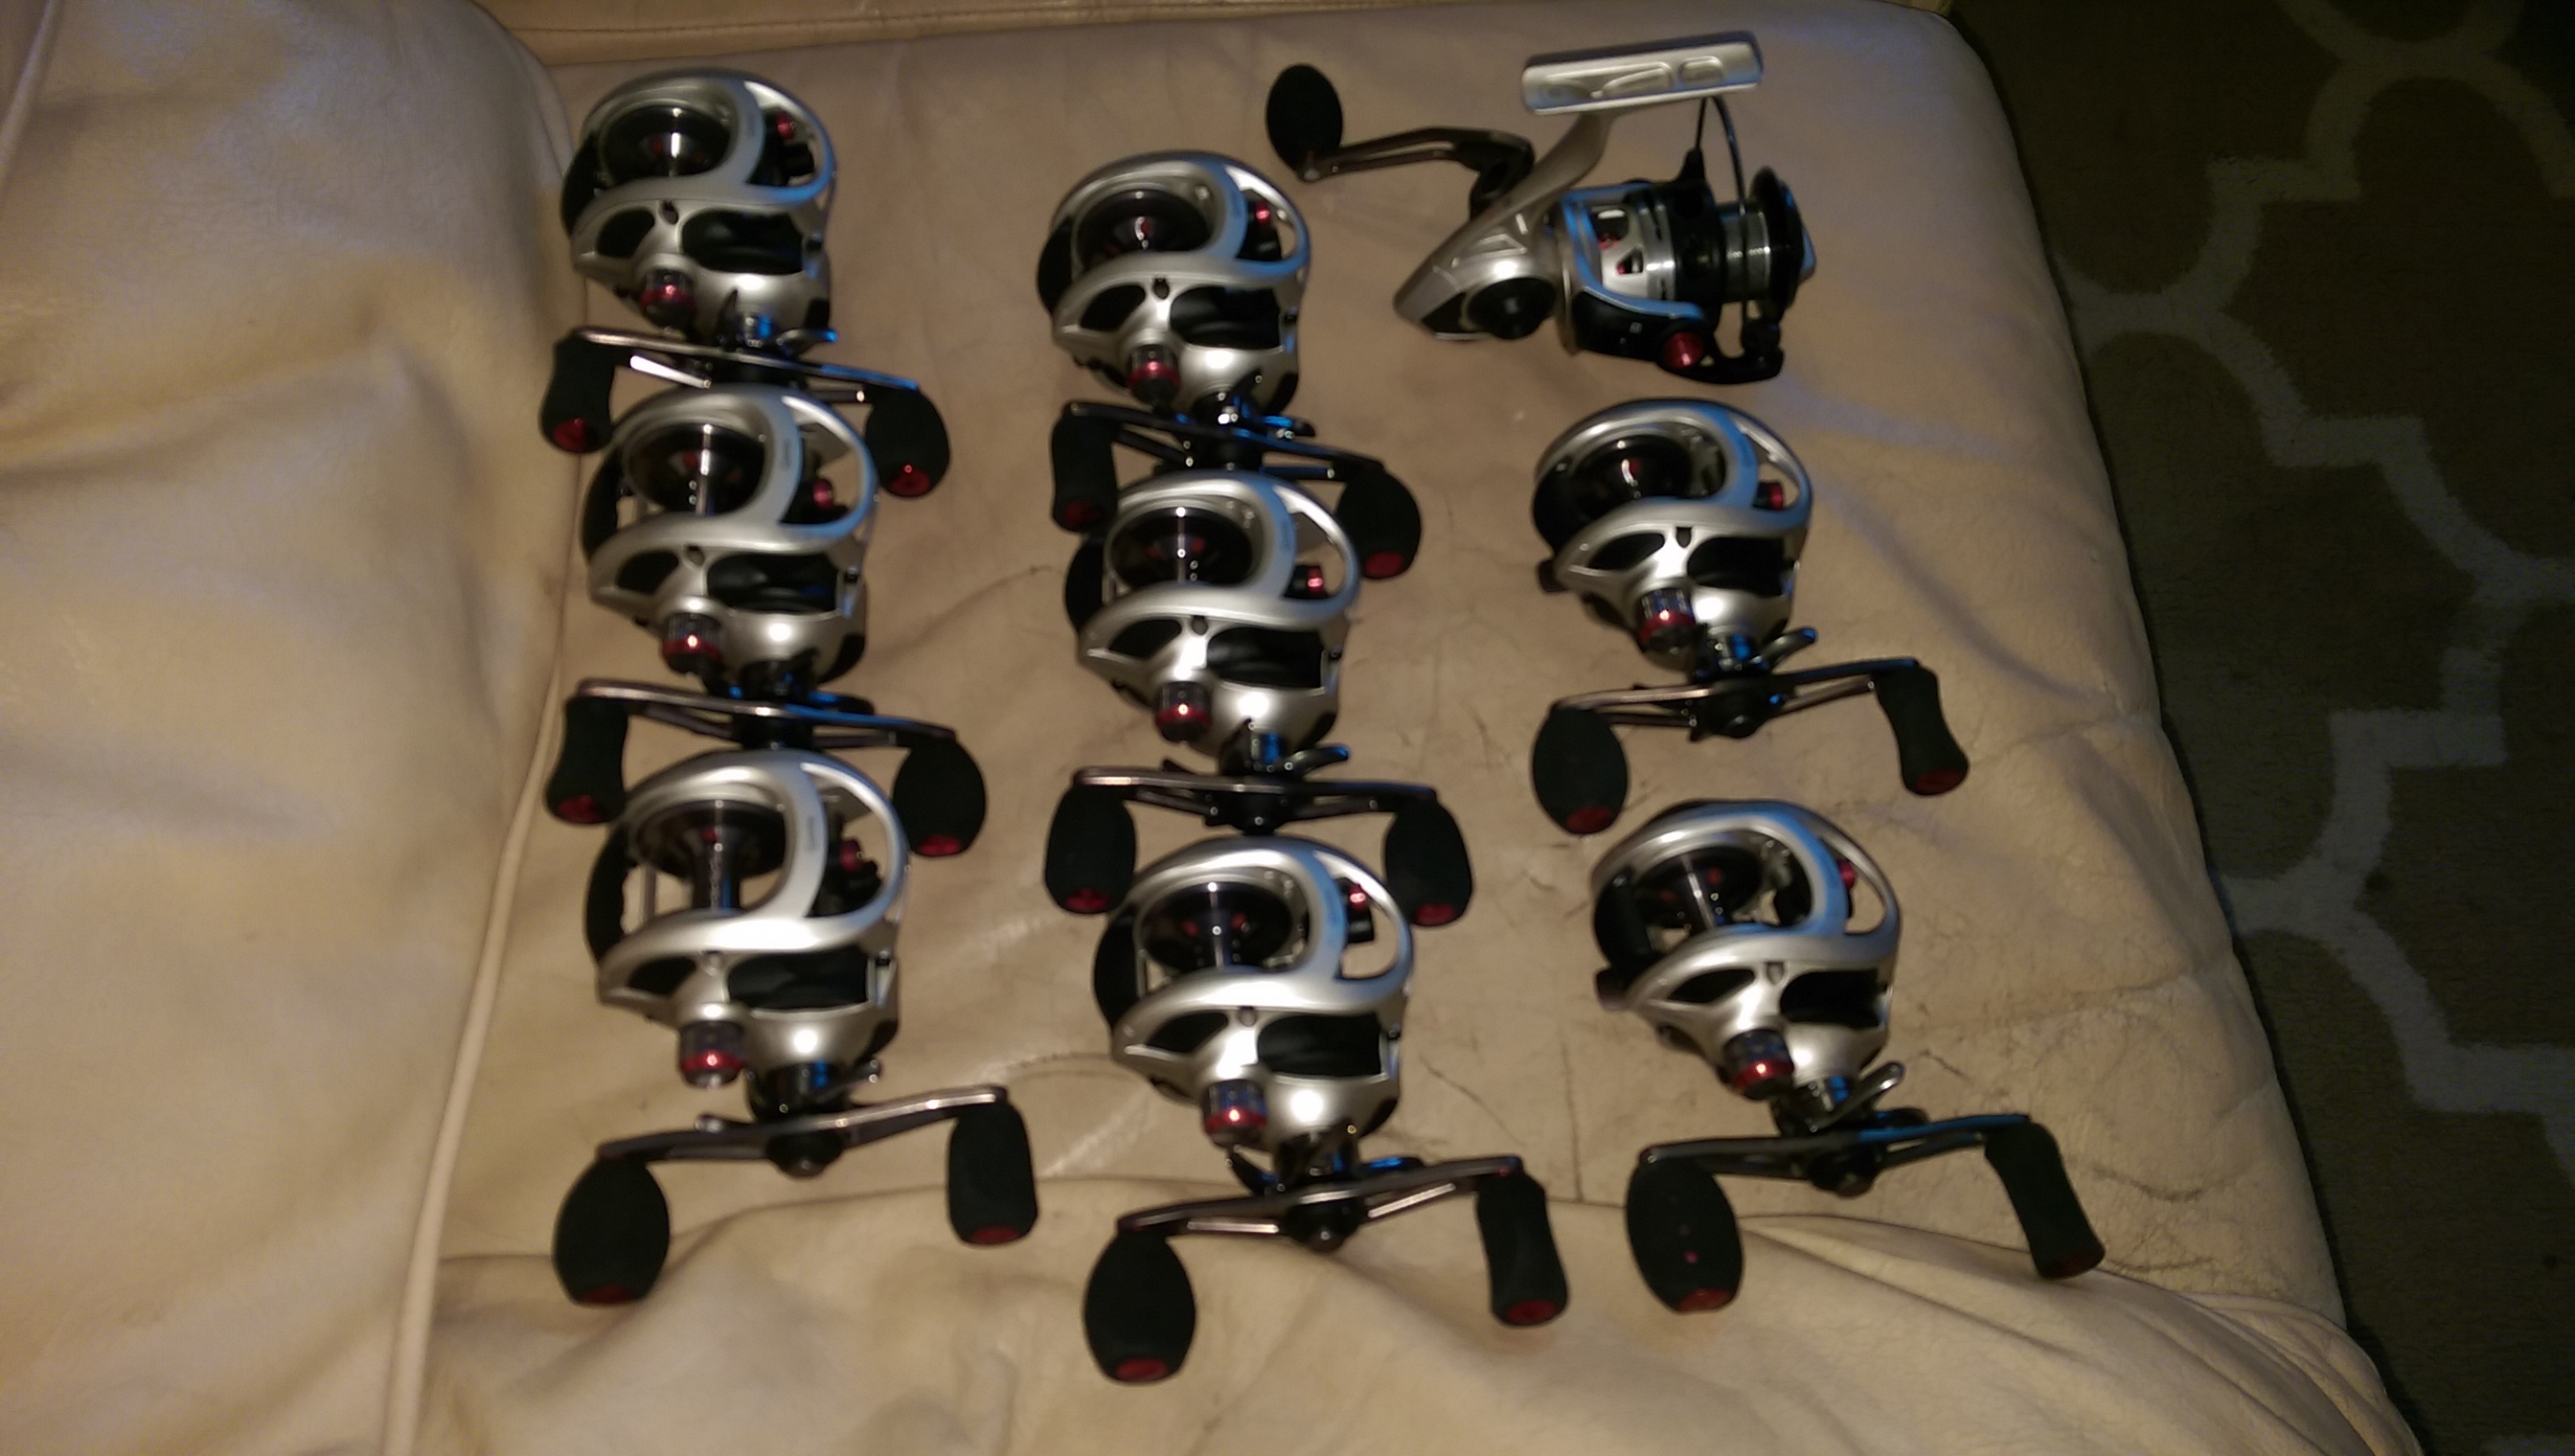 Quantum exo100hpt - Fishing Rods, Reels, Line, and Knots - Bass Fishing  Forums